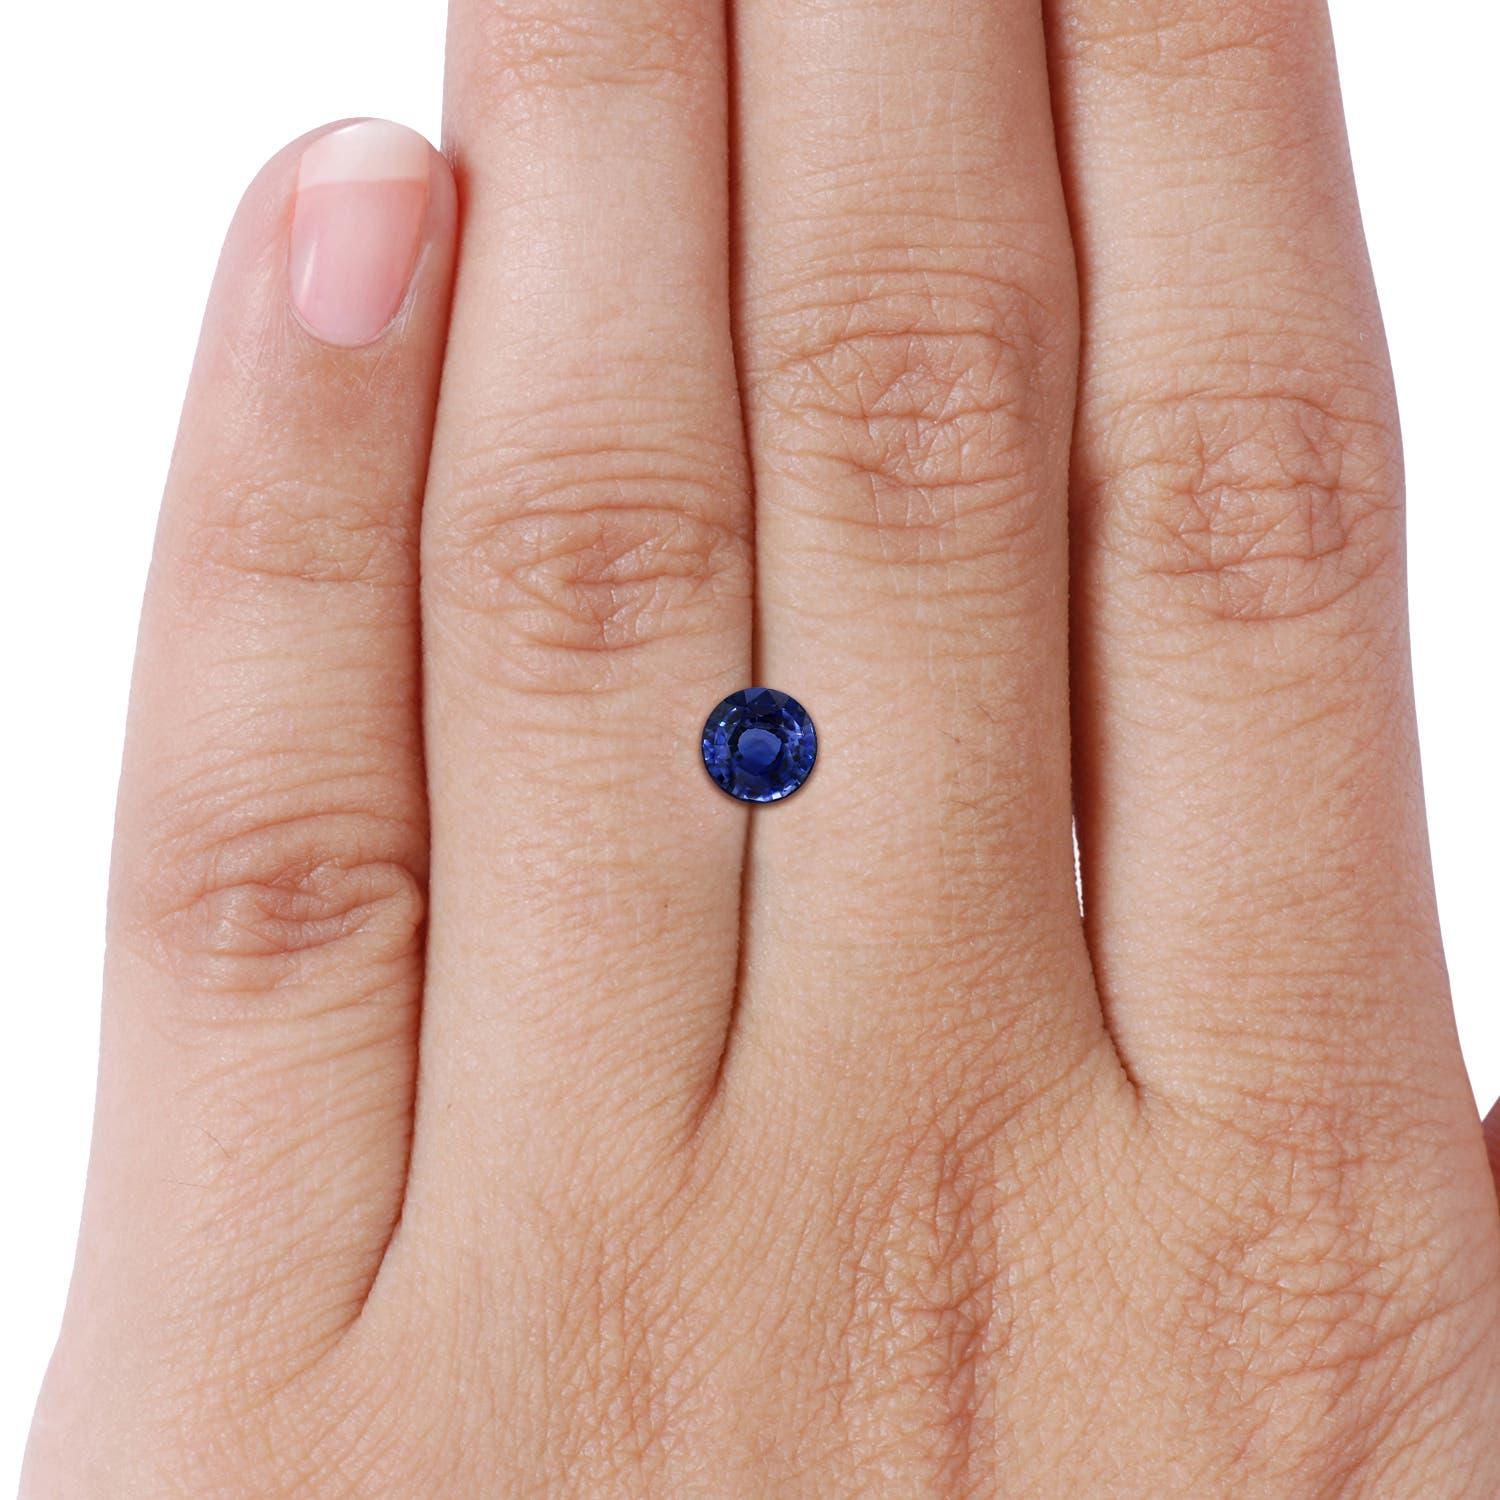 For Sale:  ANGARA GIA Certified Natural 1.33ct Blue Sapphire Solitaire Ring 14K White Gold 6